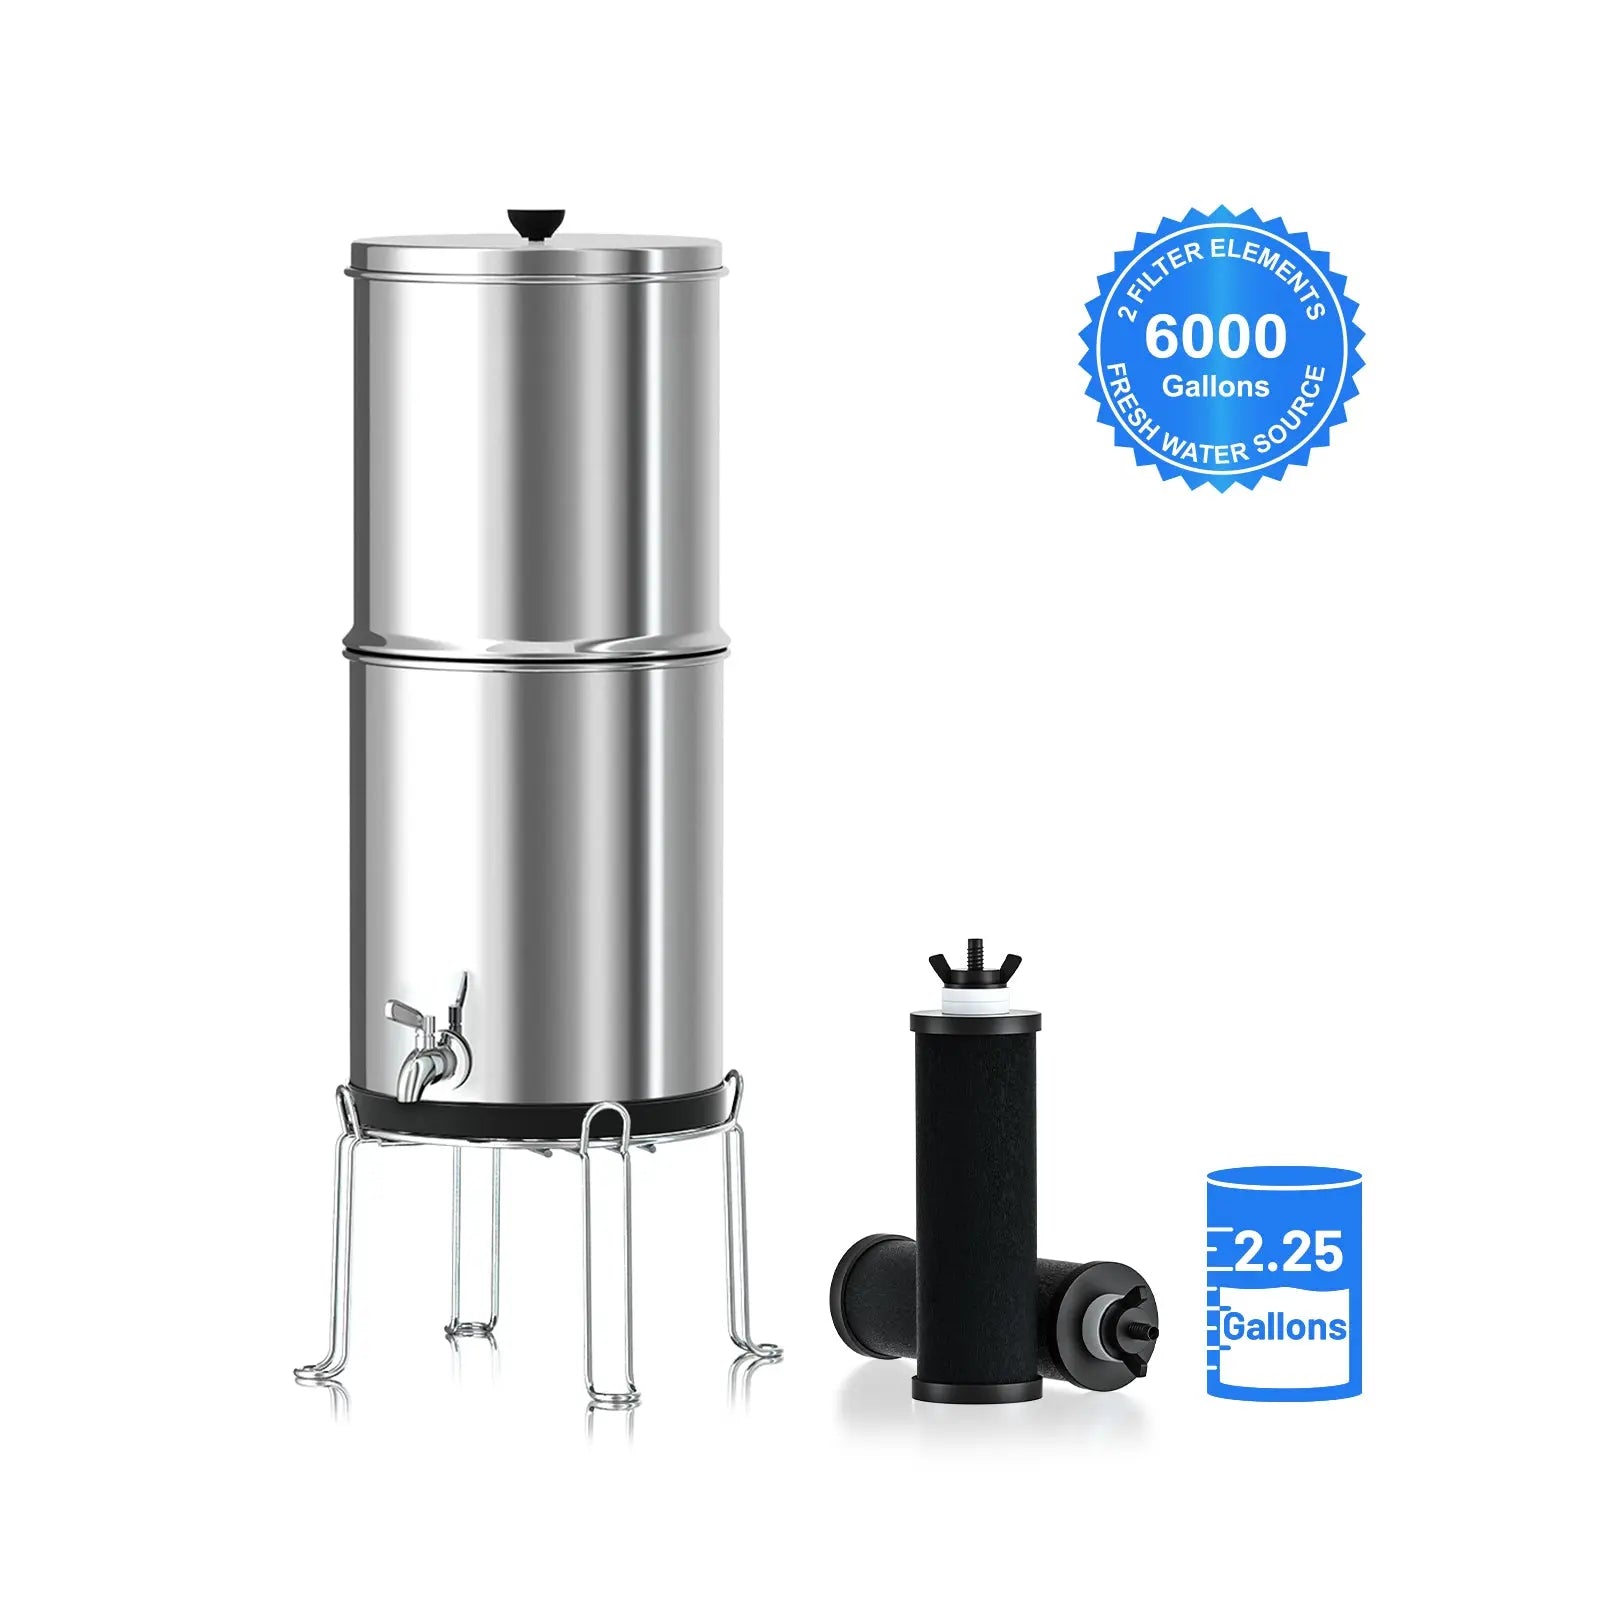 Glacier Fresh RV Water Filter System: Trusted 3-Stage Filtration